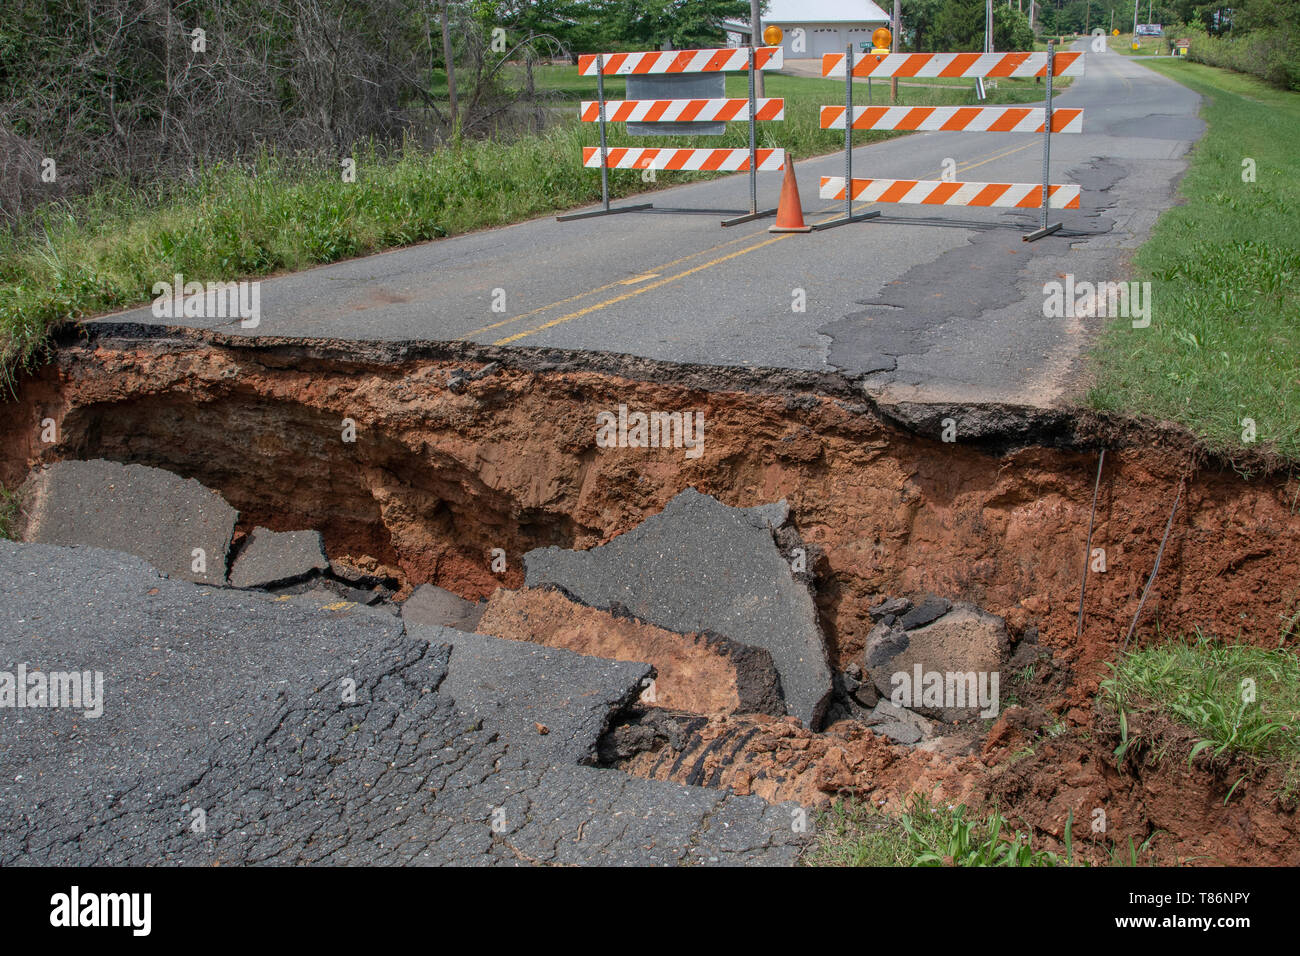 BOSSIER PARISH, LA., U.S.A. - MAY 9, 2019: Following thunderstorms and heavy rains, the ground has washed away and the pavement caved in. Stock Photo